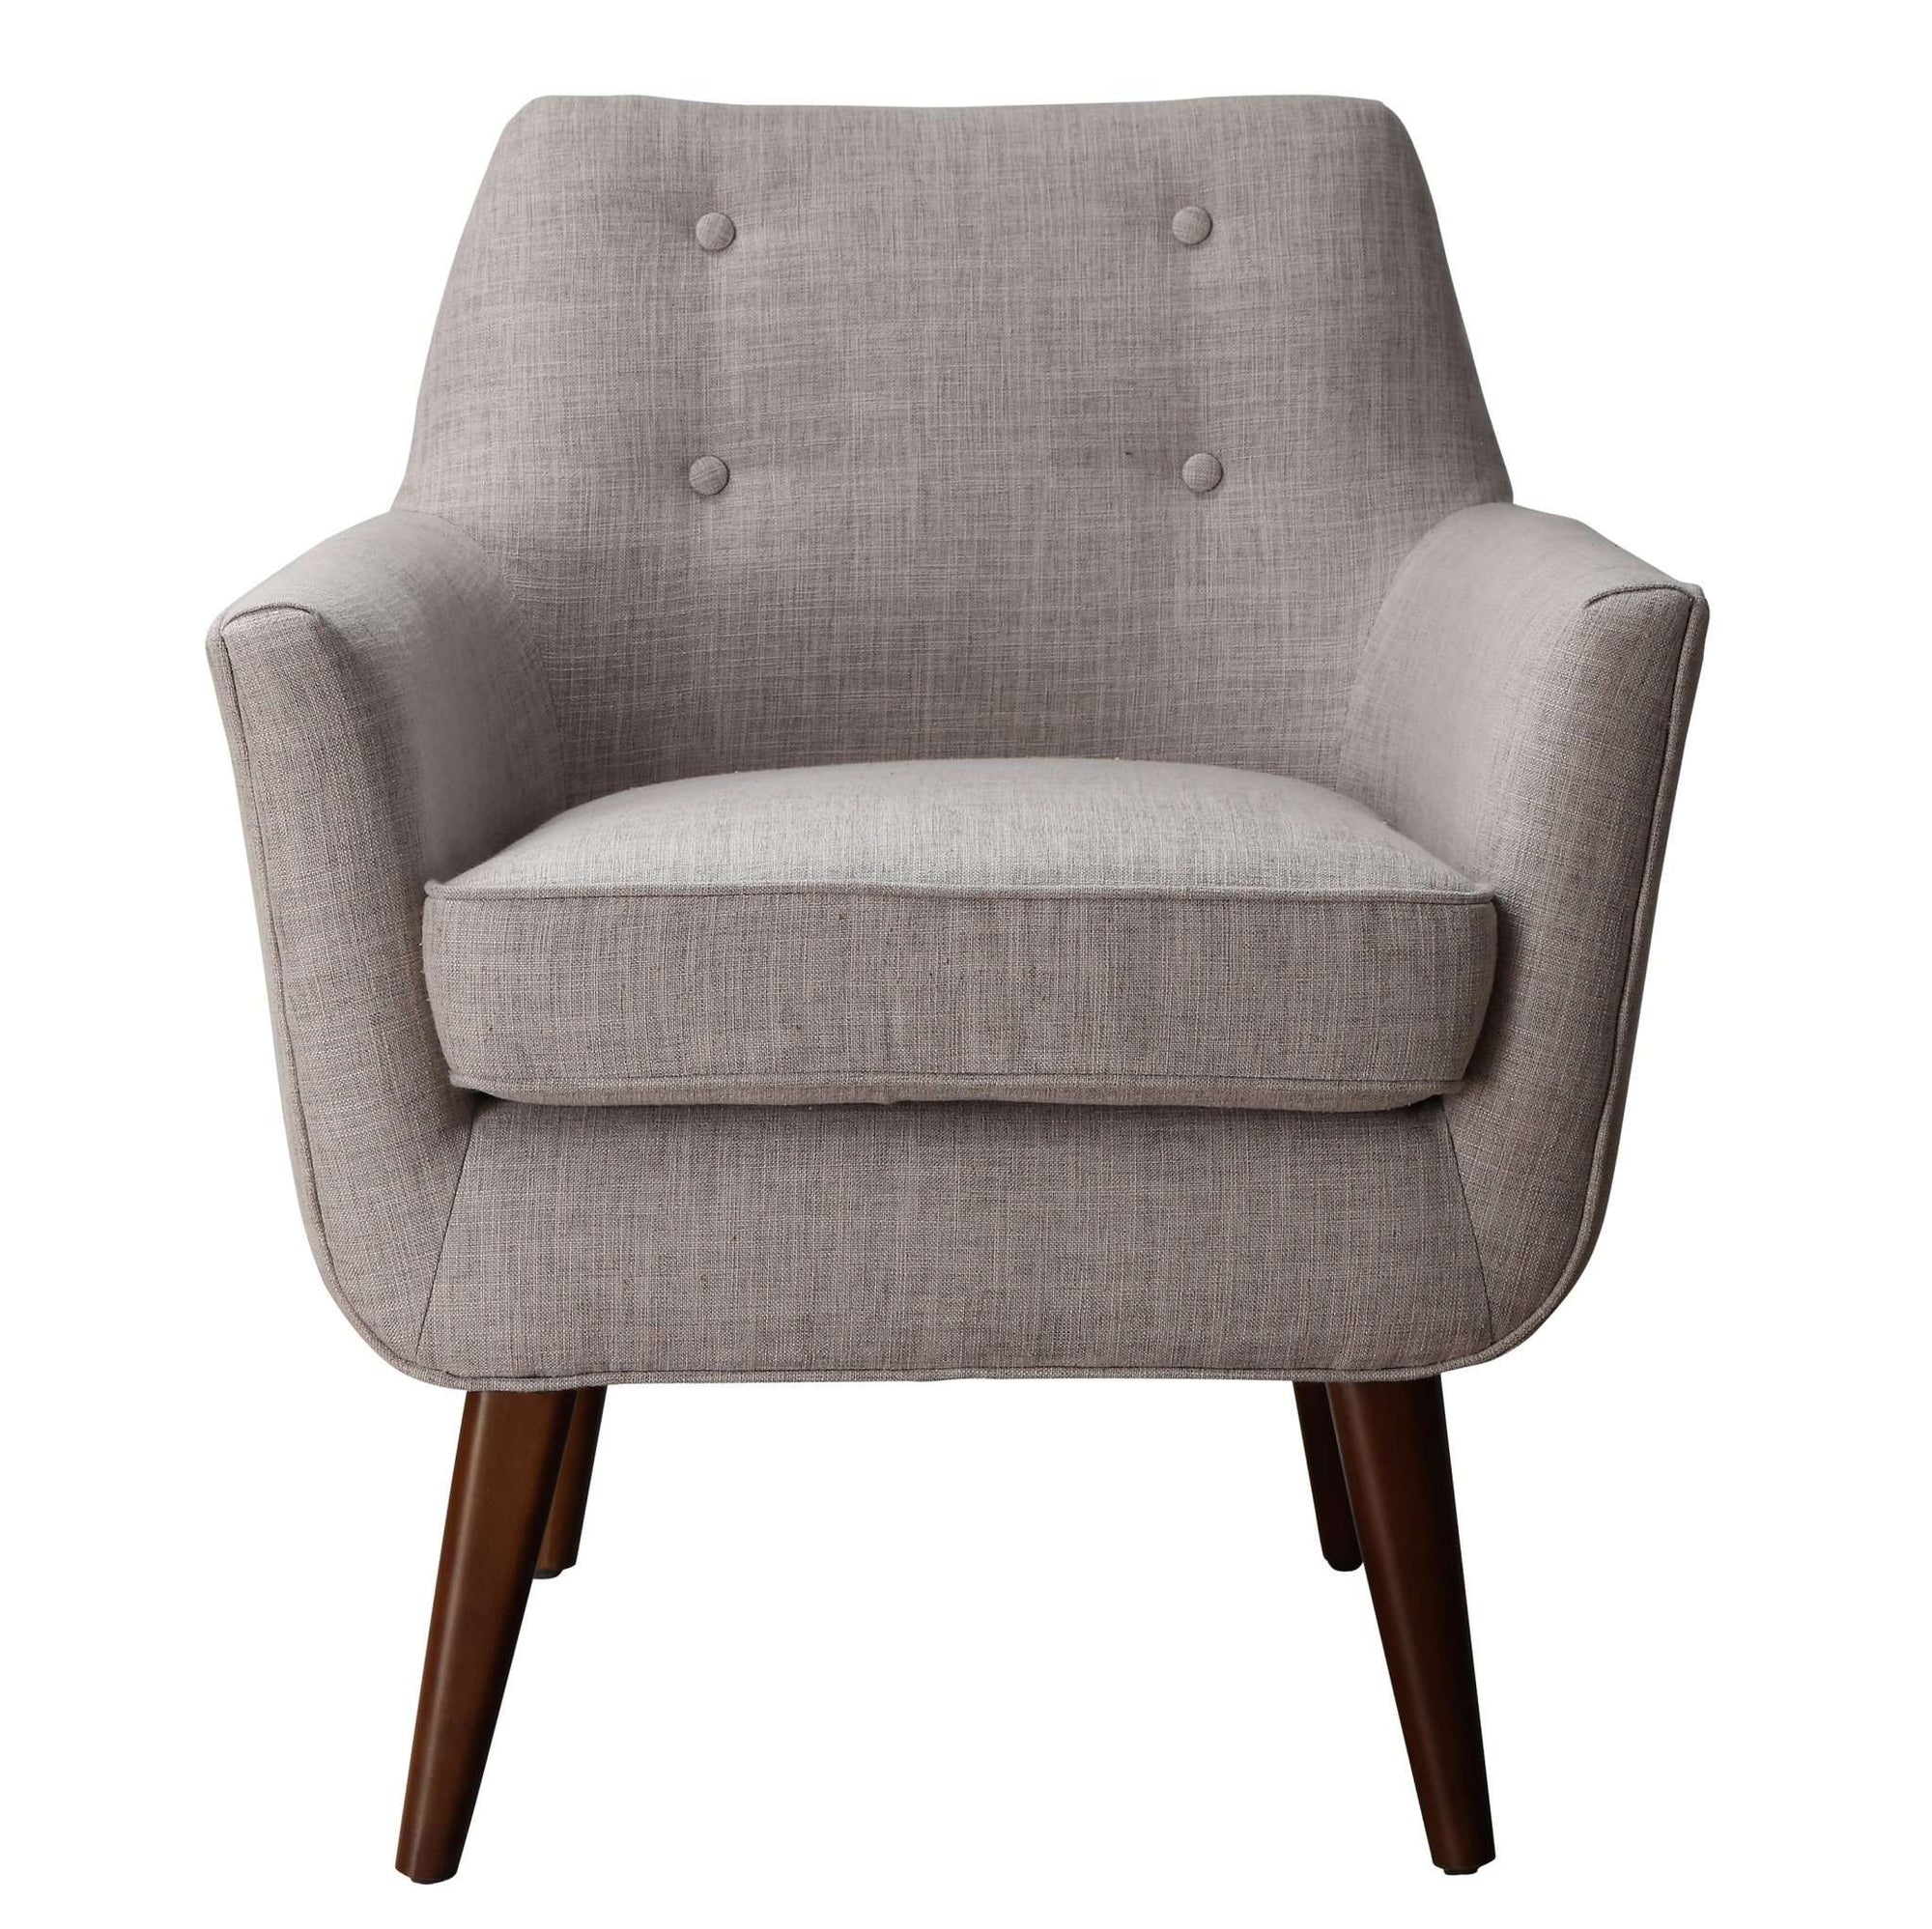 Tov-Clyde Linen Chair-Lounge Chair-MODTEMPO